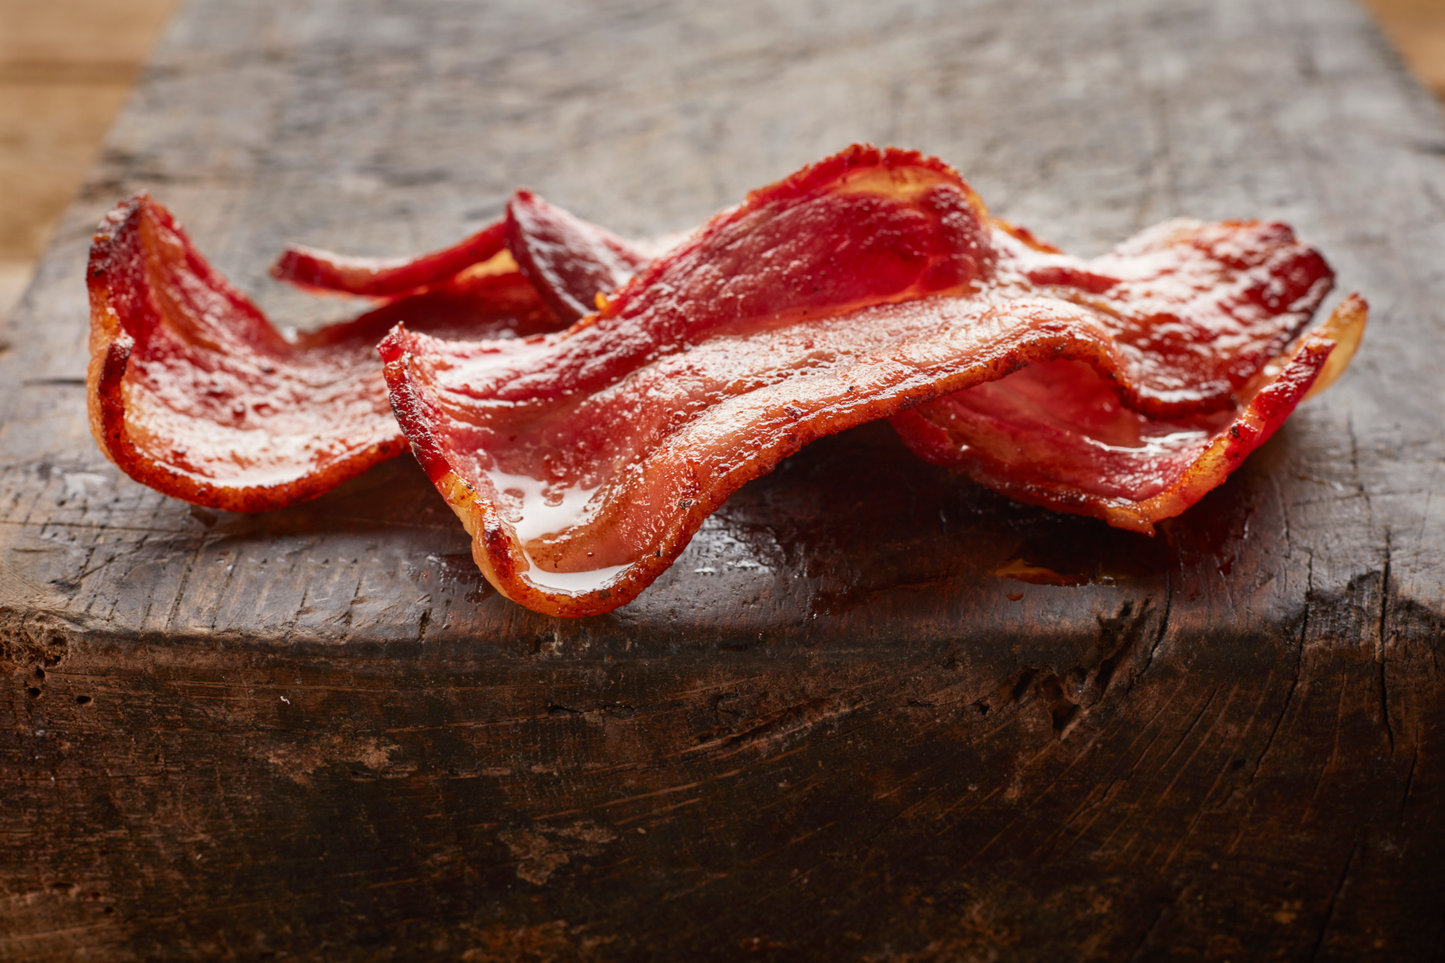 Monthly Bacon Subscription